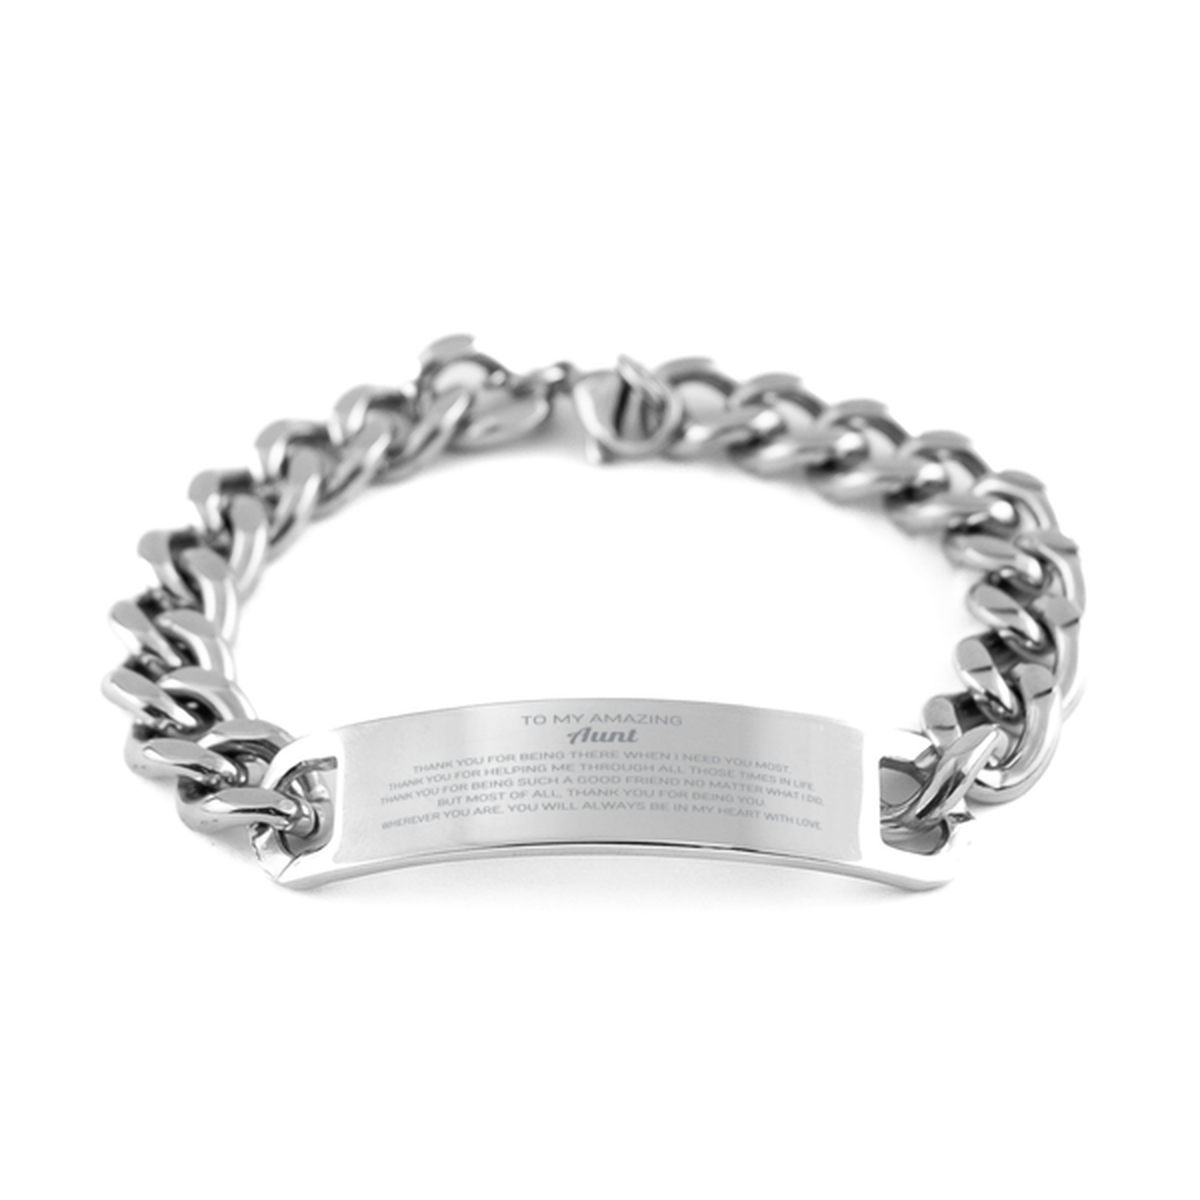 To My Amazing Aunt Cuban Chain Stainless Steel Bracelet, Thank you for being there, Thank You Gifts For Aunt, Birthday, Christmas Unique Gifts For Aunt